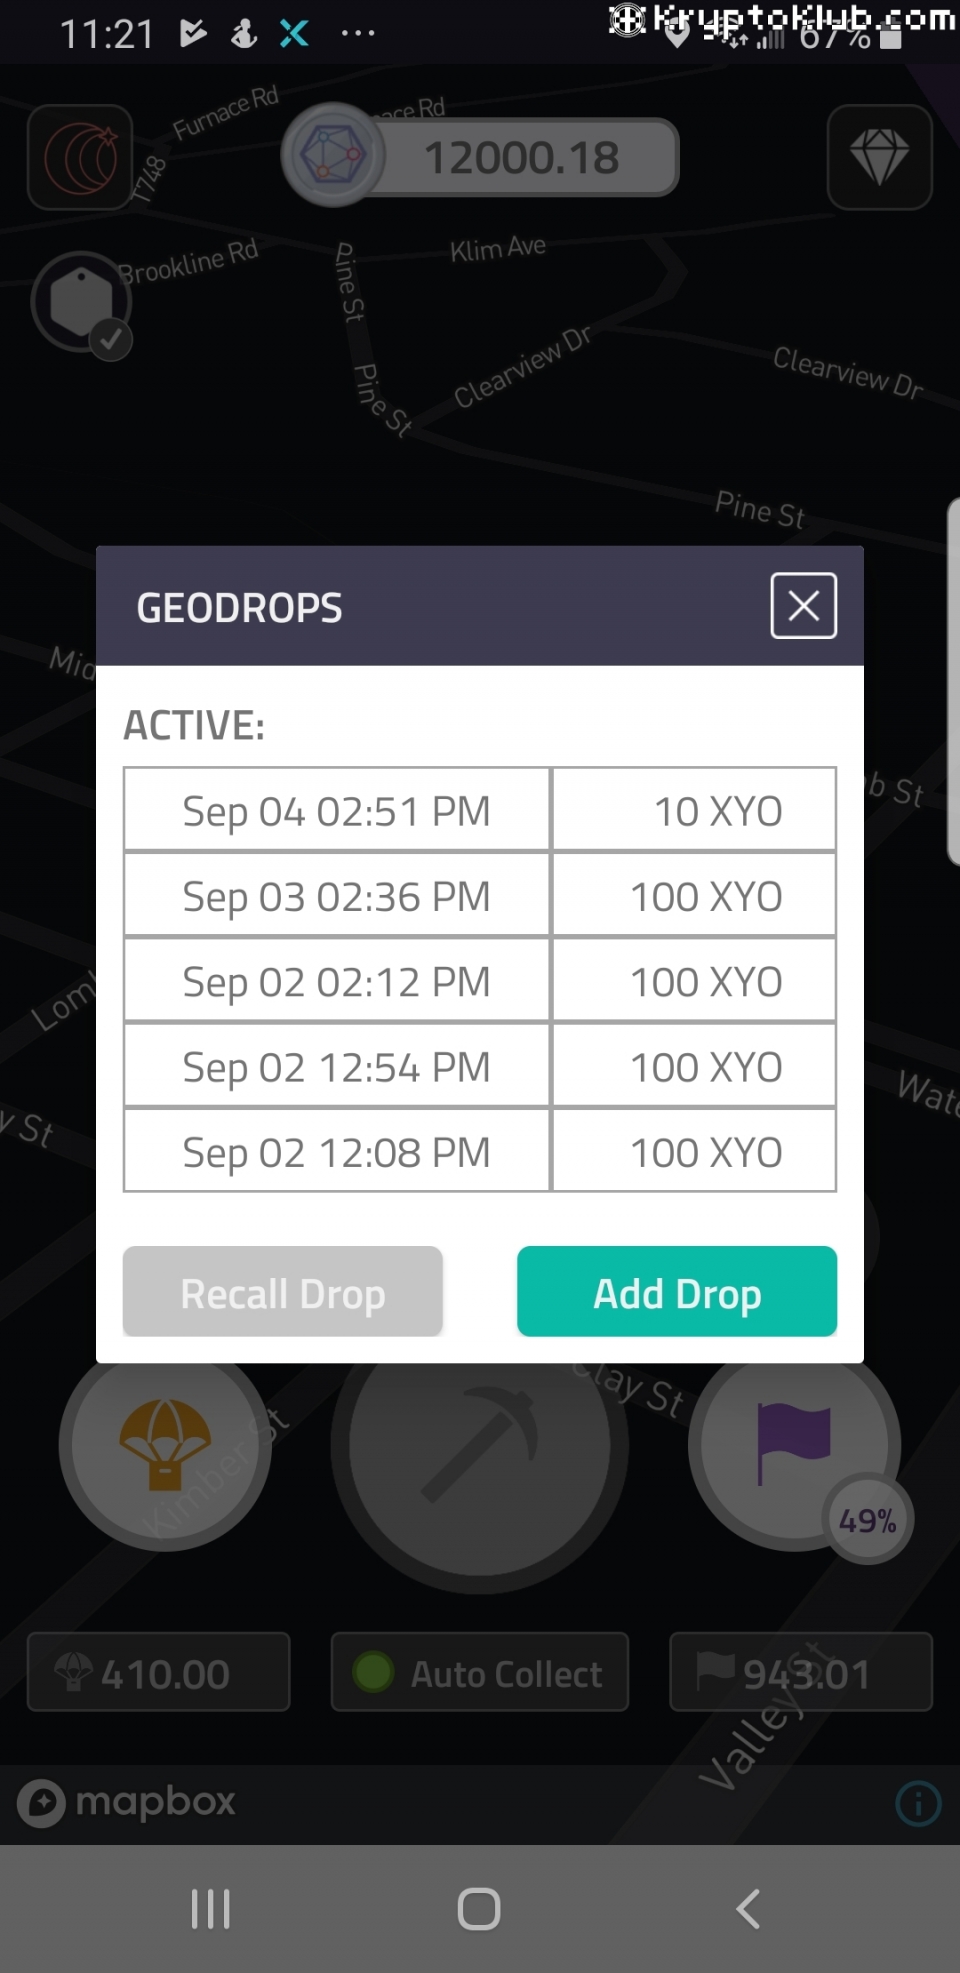 When is one going to get these geodrops .. lol